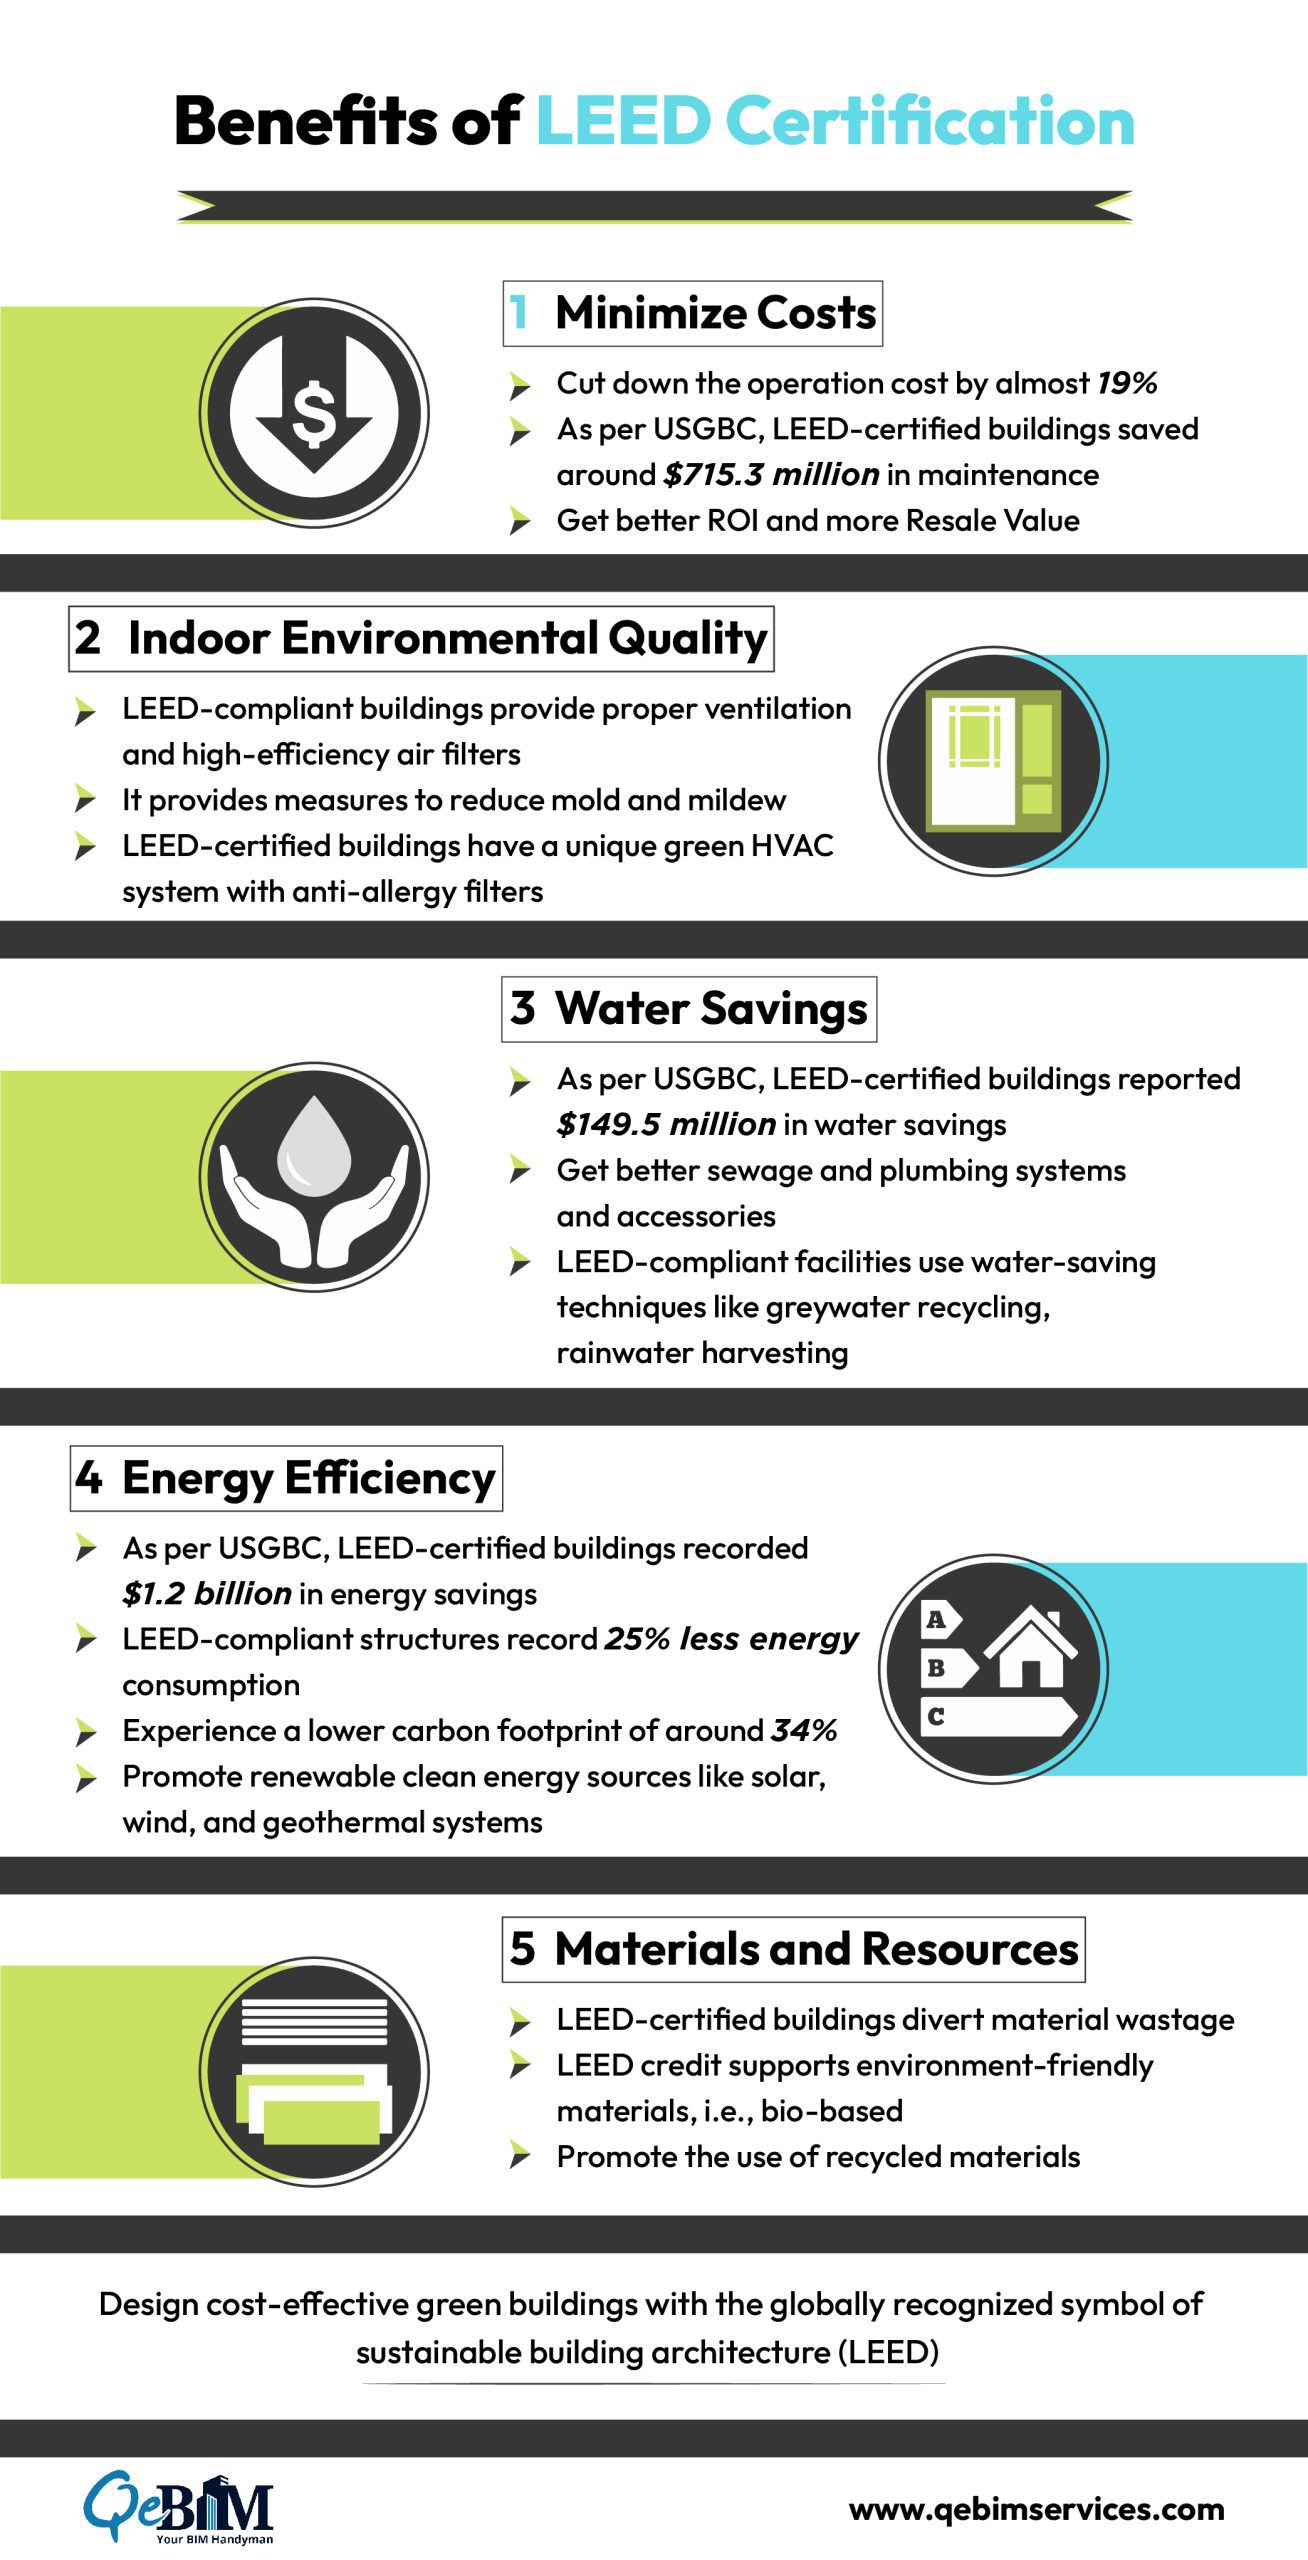 What are the Advantages of LEED Certification?